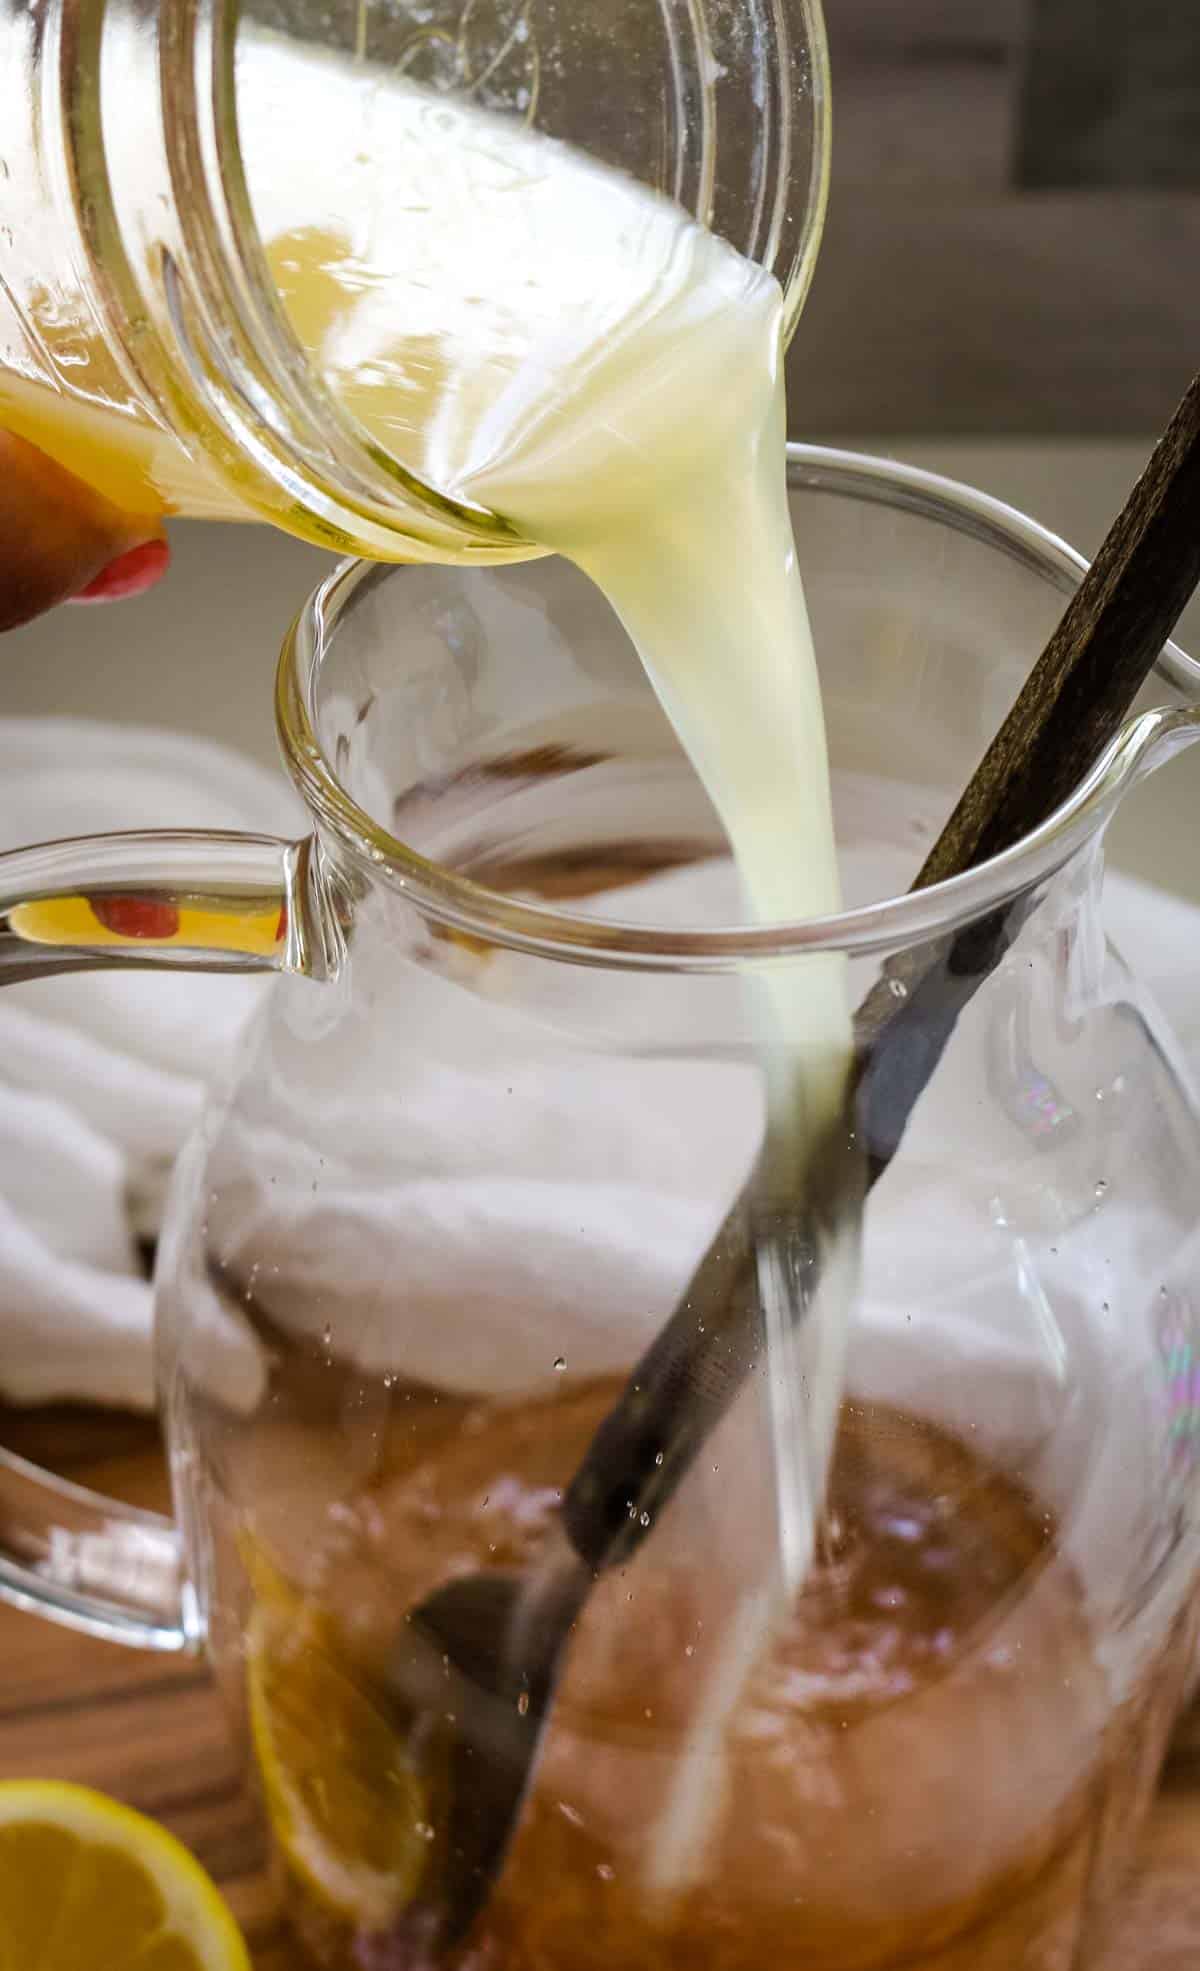 freshly squeezed lemon juice poured into a glass clear pitcher.